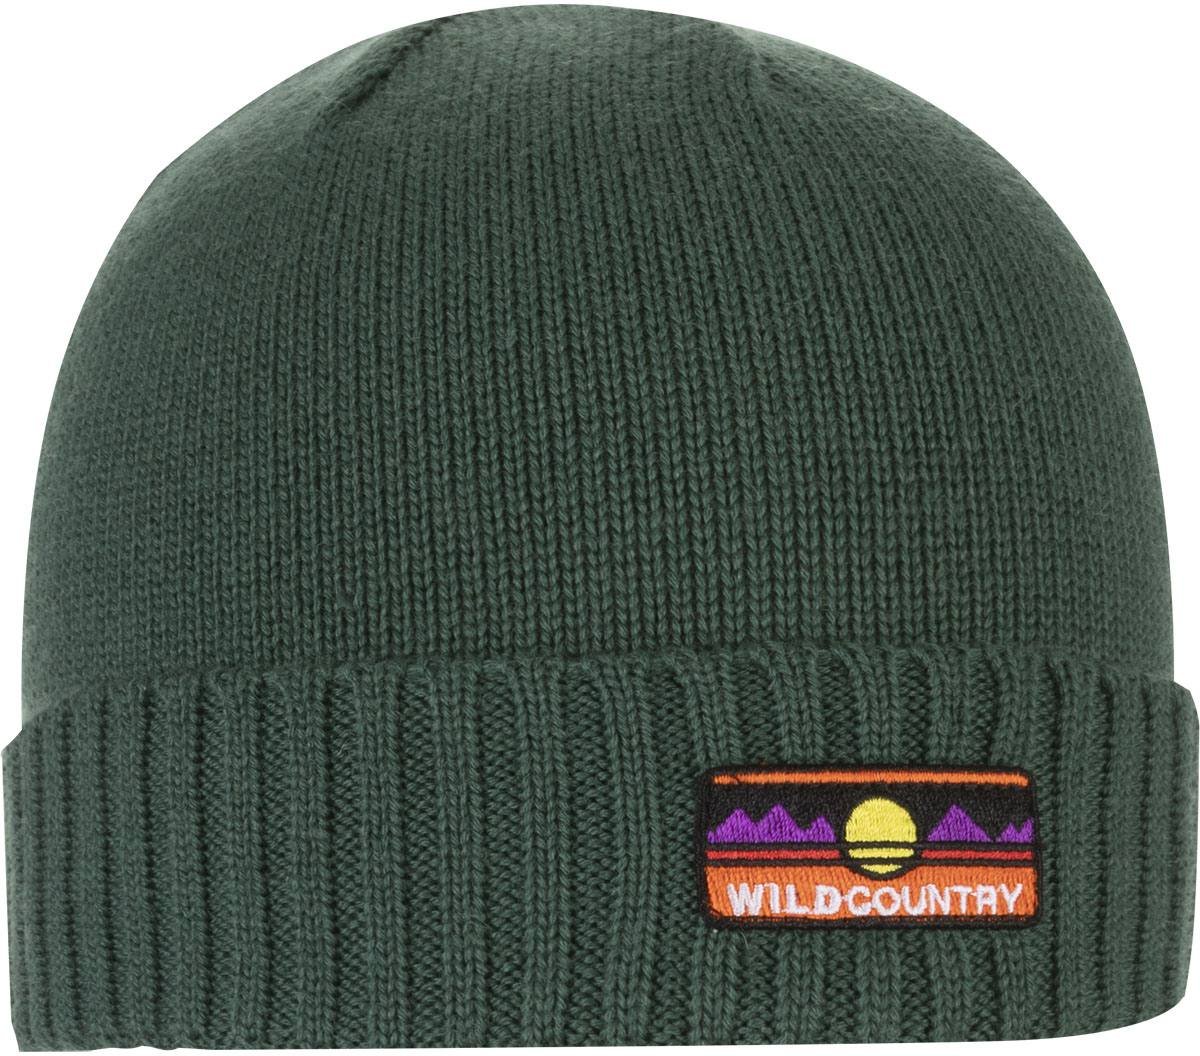 Wild Country Spotter beanie